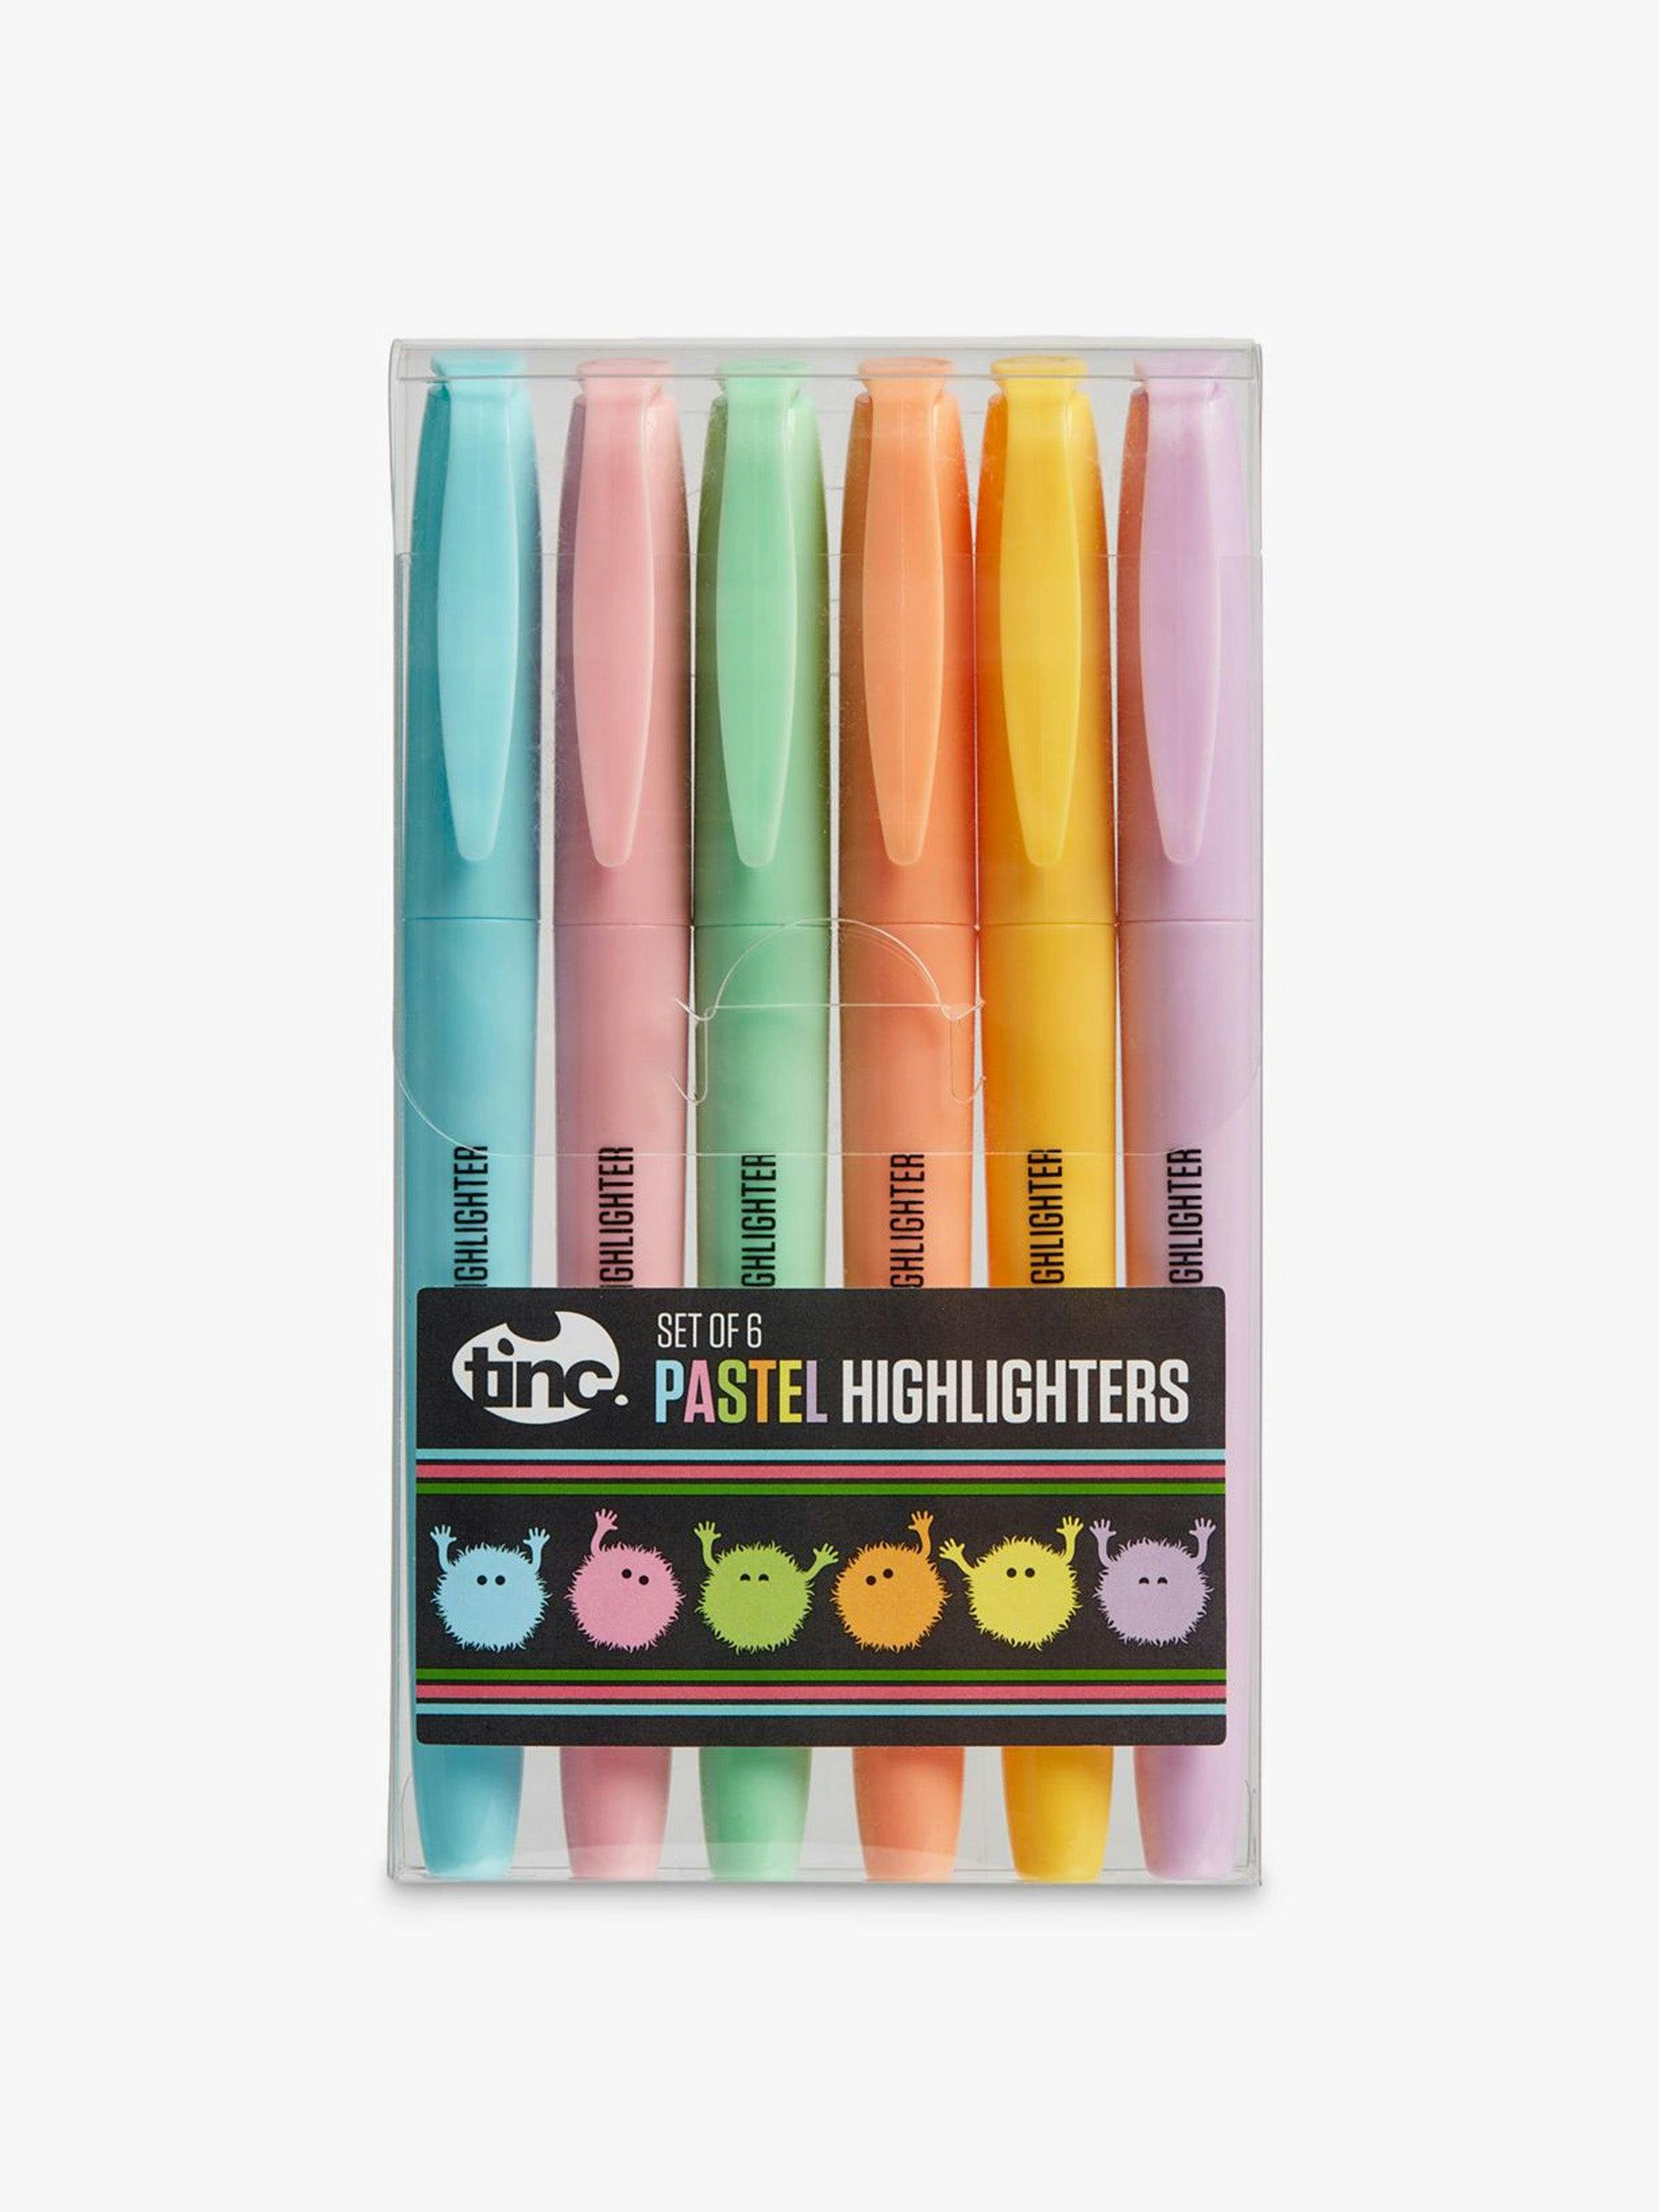 Pastel highlighters (set of 6)